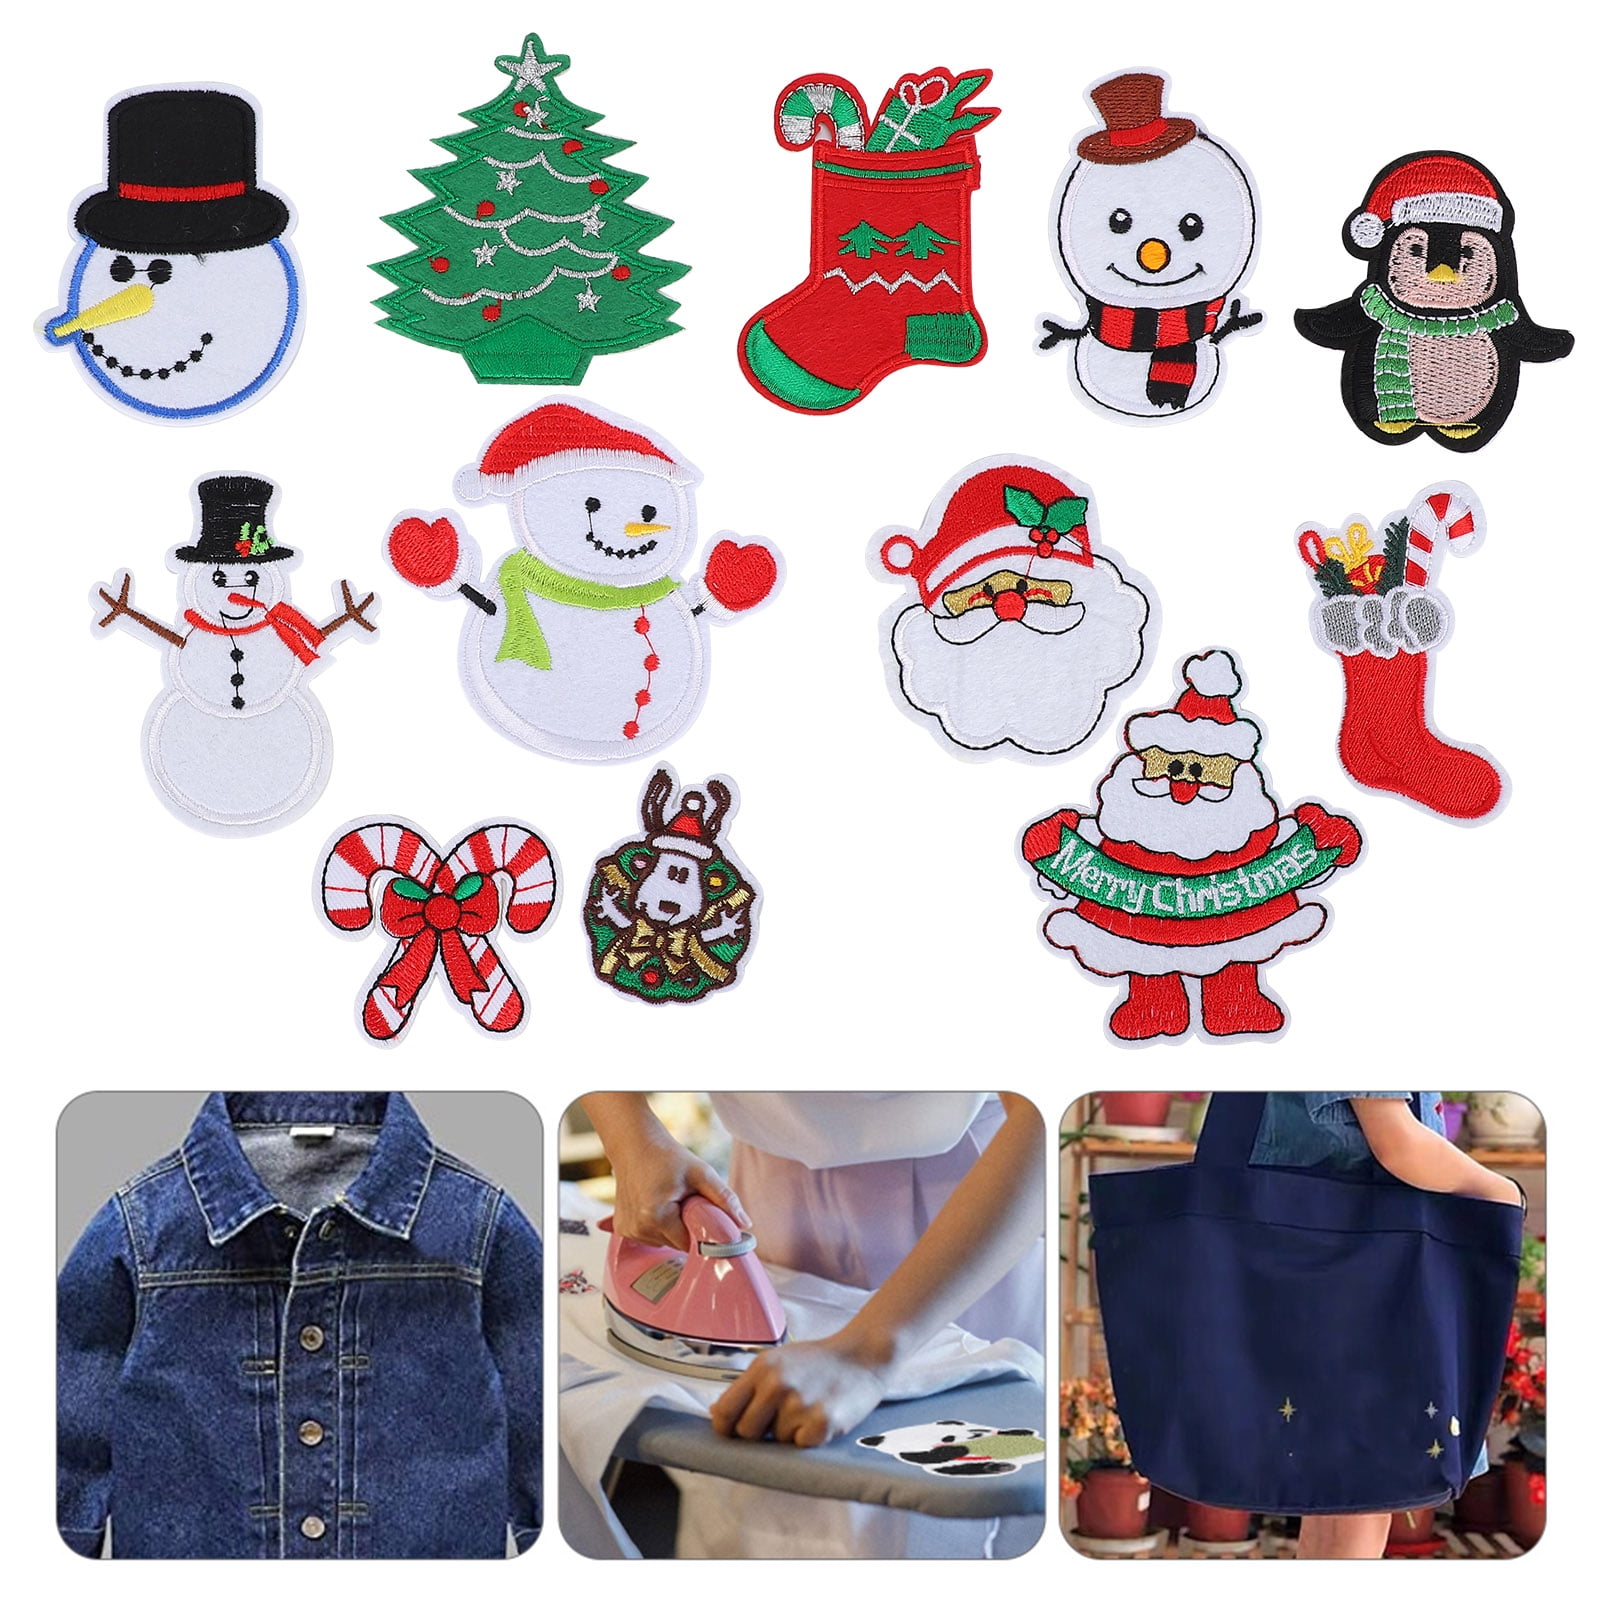  6 Sheets Christmas Iron on Patches for Clothes Xmas